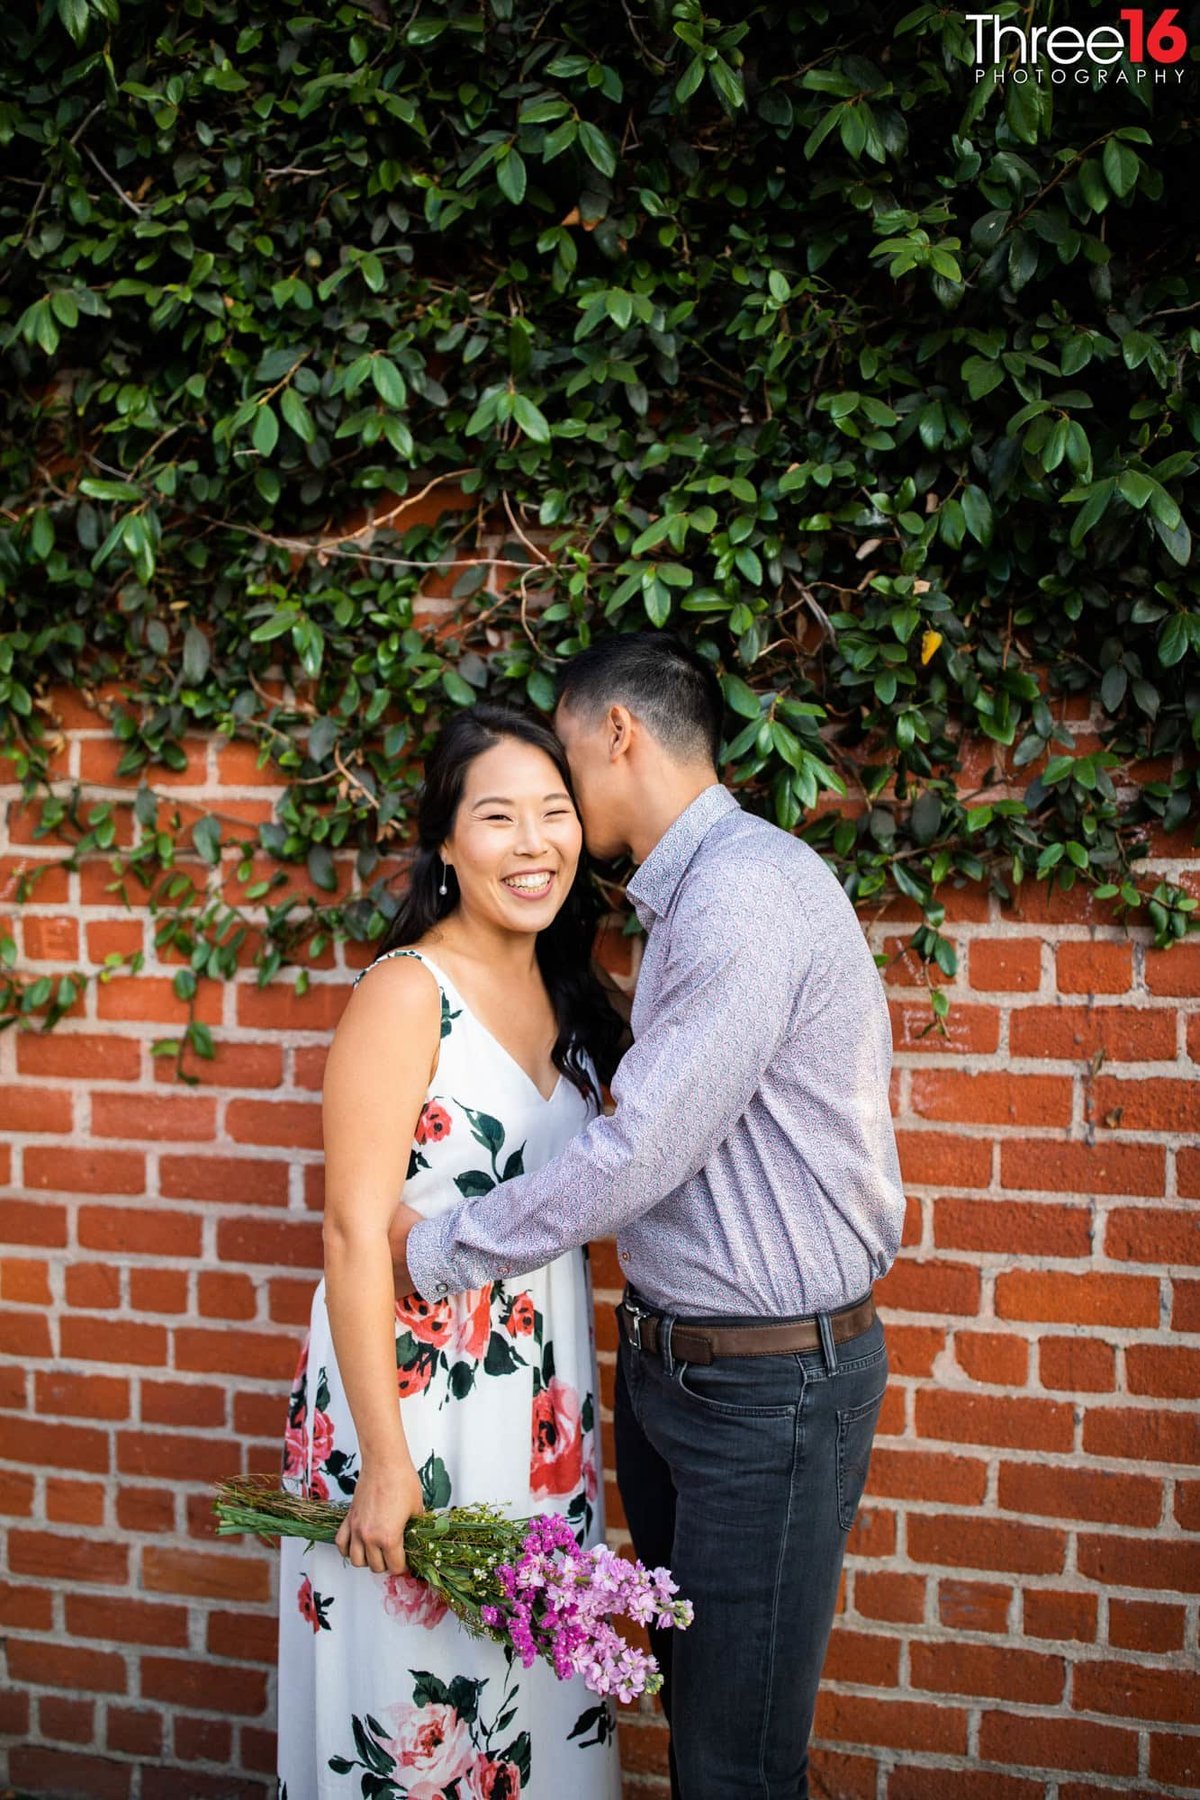 Downtown Los Angeles Engagement Photos LA County Wedding Professional